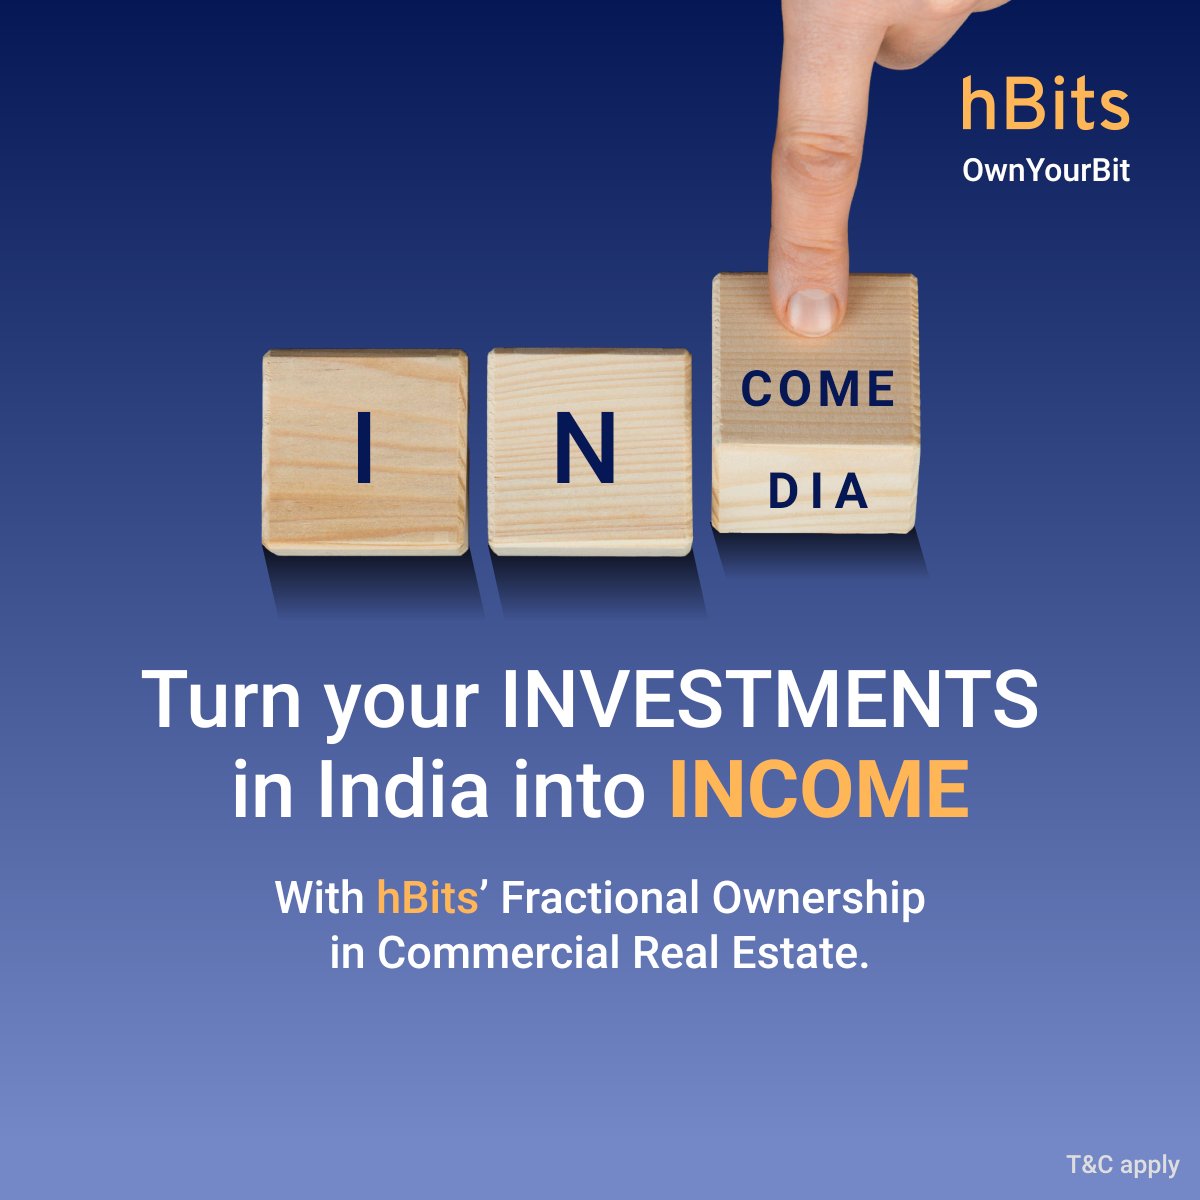 Discover the power of Fractional Ownership in India for consistent returns. Invest in high-value properties, mitigate risk, and enjoy monthly gains effortlessly. Start maximizing your returns today! #hBits #ownyourbit #RealEstateInvestment #FractionalOwnership #Investment